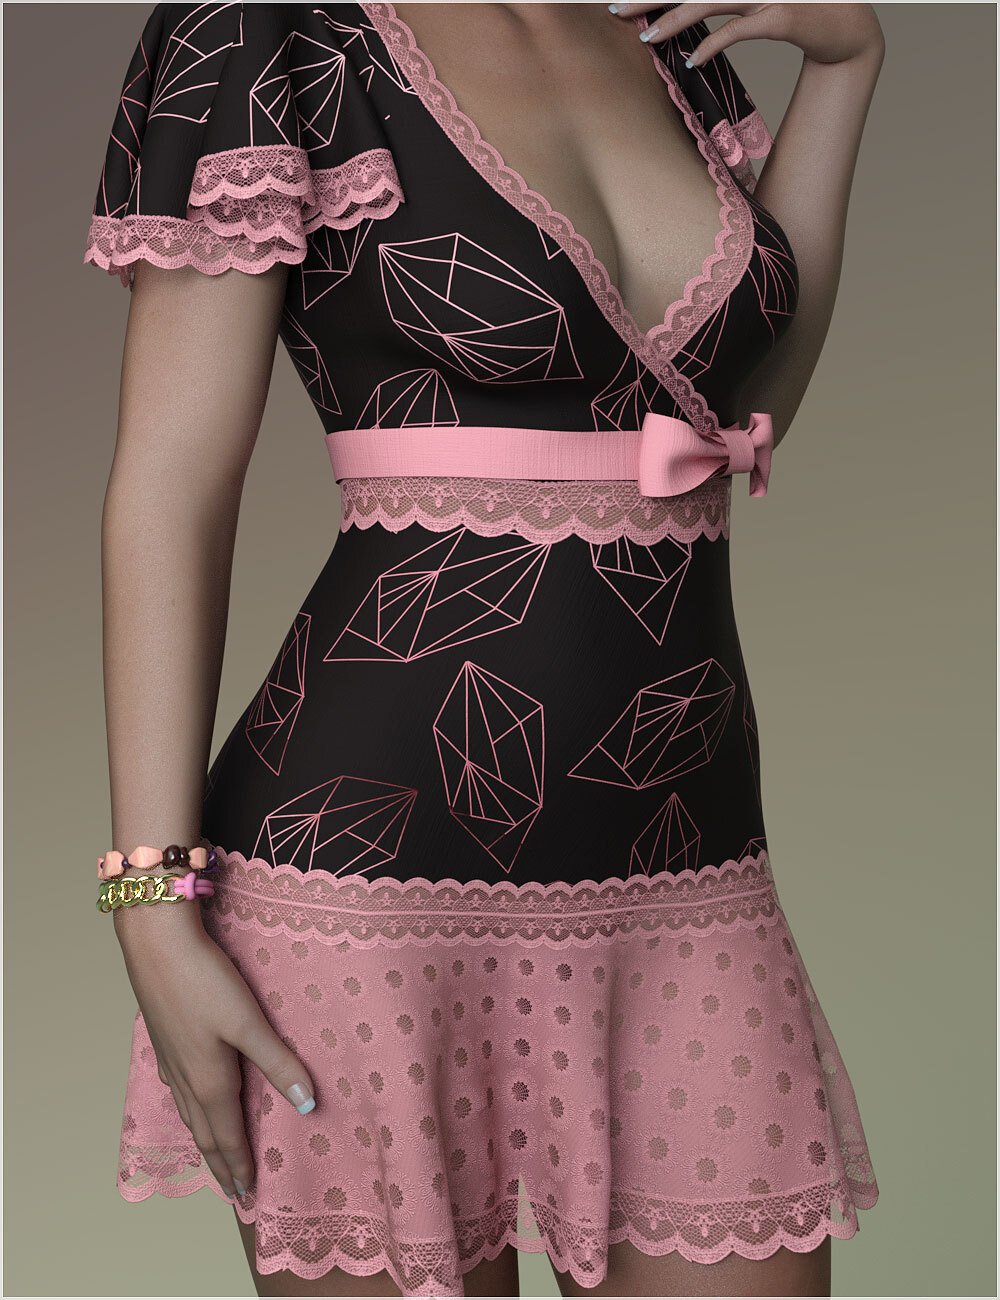 Stylish For dForce Miranda Dress Outfit by: Belladzines, 3D Models by Daz 3D